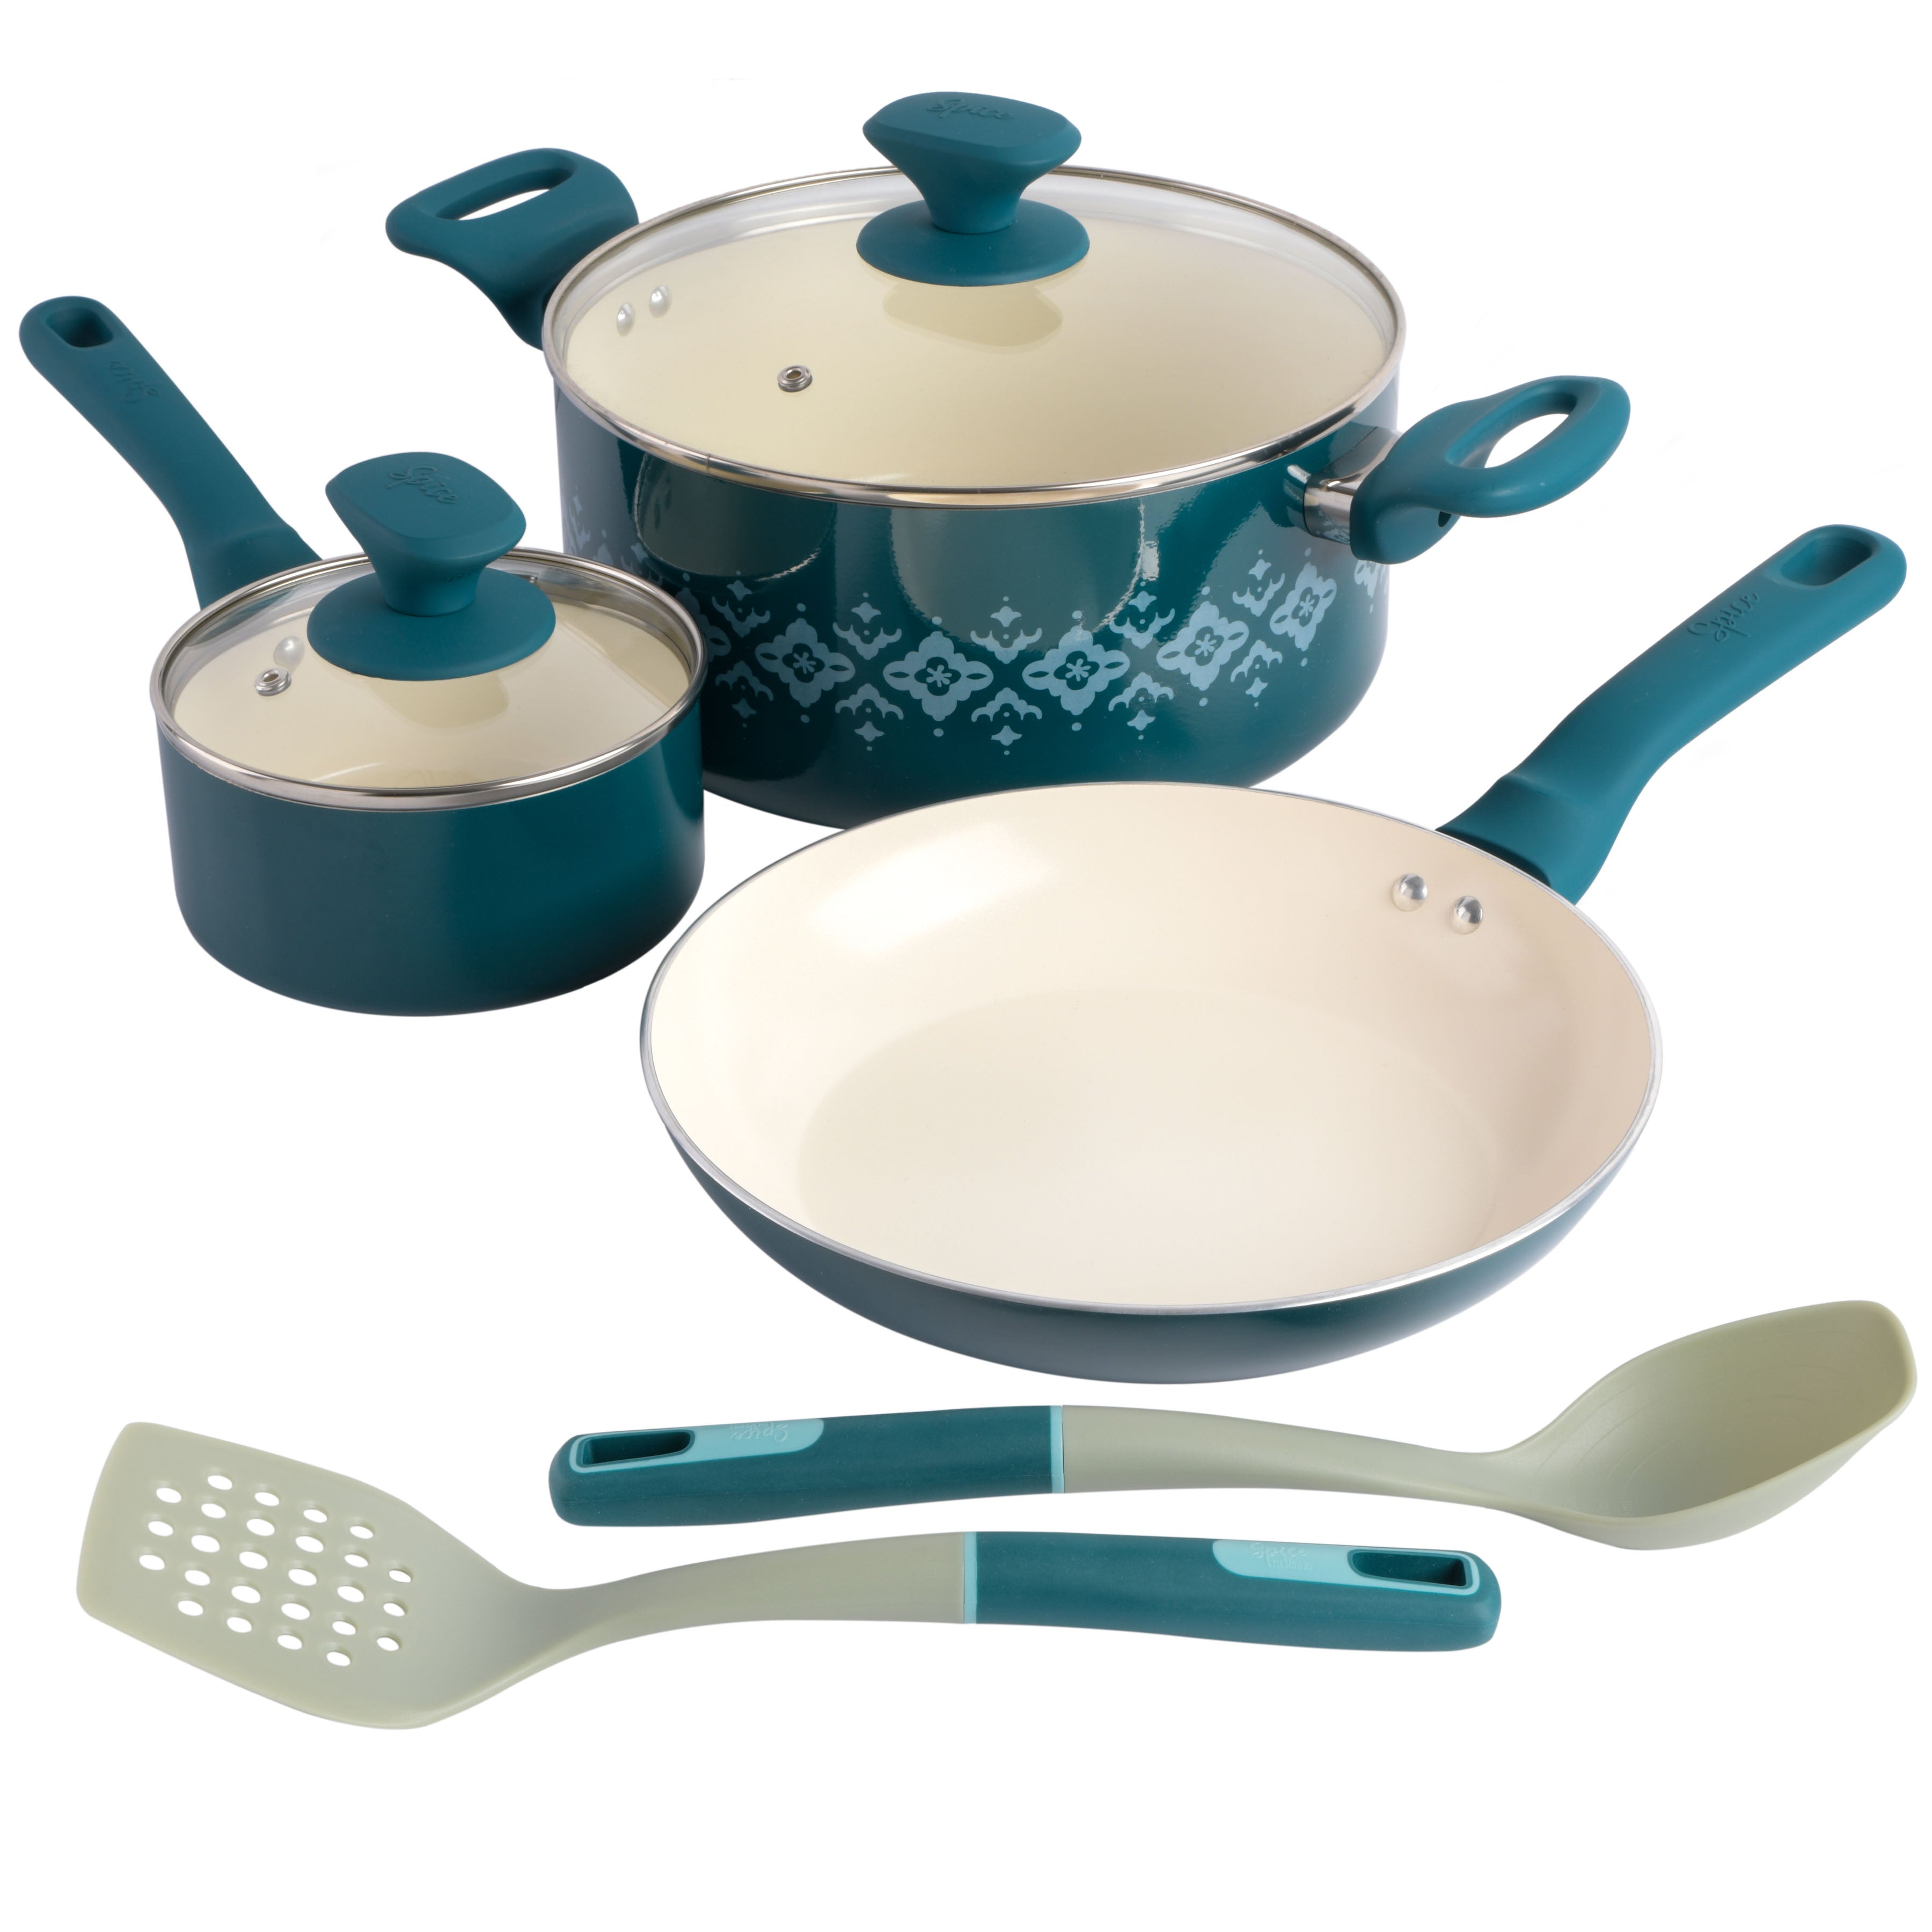 COOK With COLOR 7 Pc Kitchen Gadget Set Stainless Steel Utensils with Soft  Touch Mint Handles